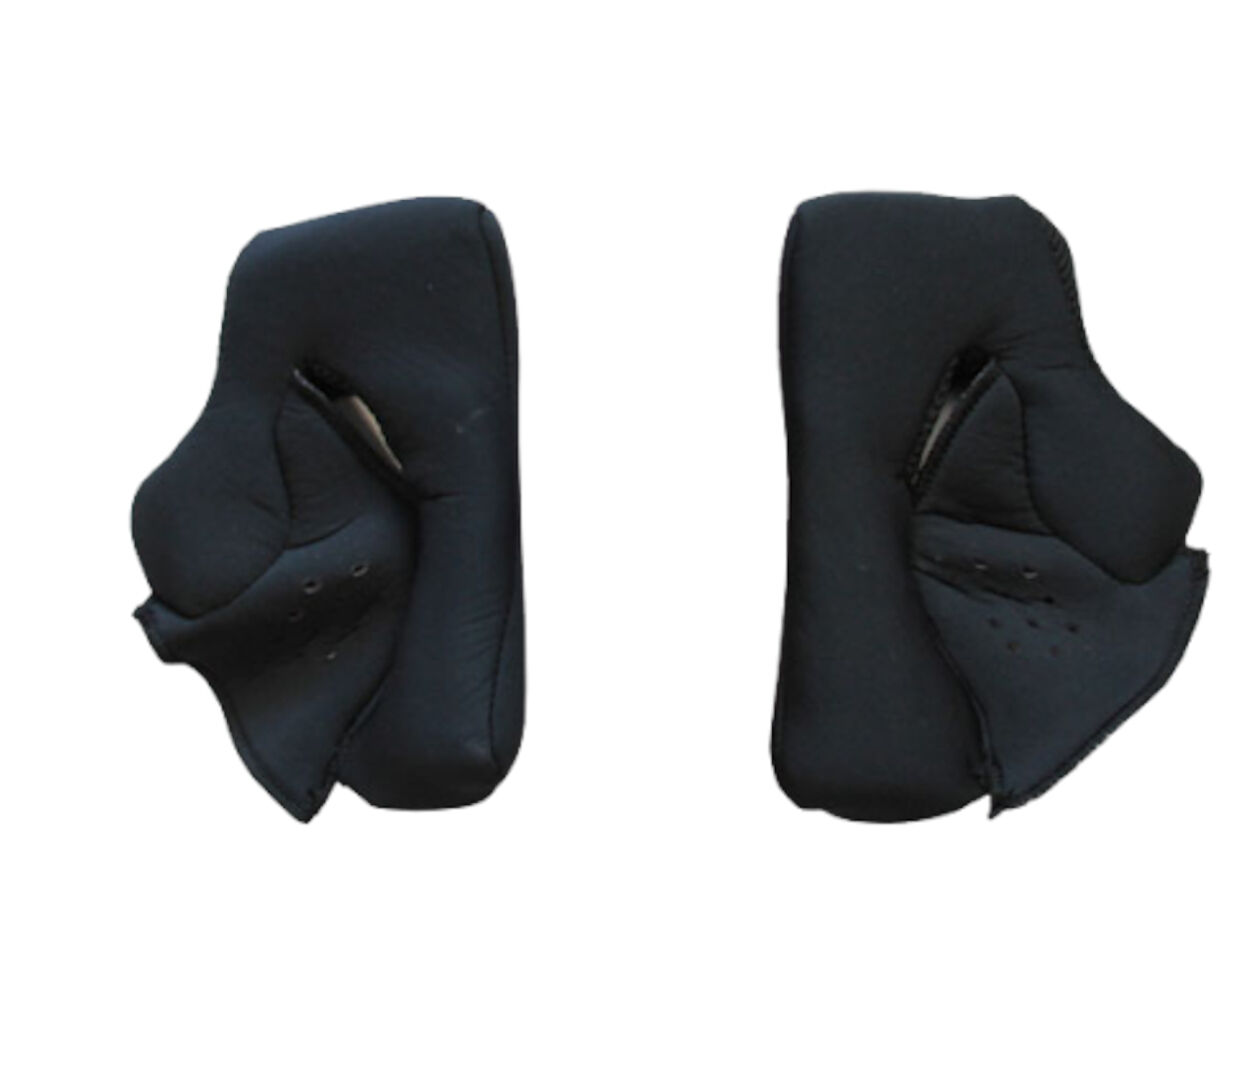 Photos - Other for Motorcycles Nexx X.Wed 2 Cheek Pads Unisex Black Size: L 04xwe01c18009000l 